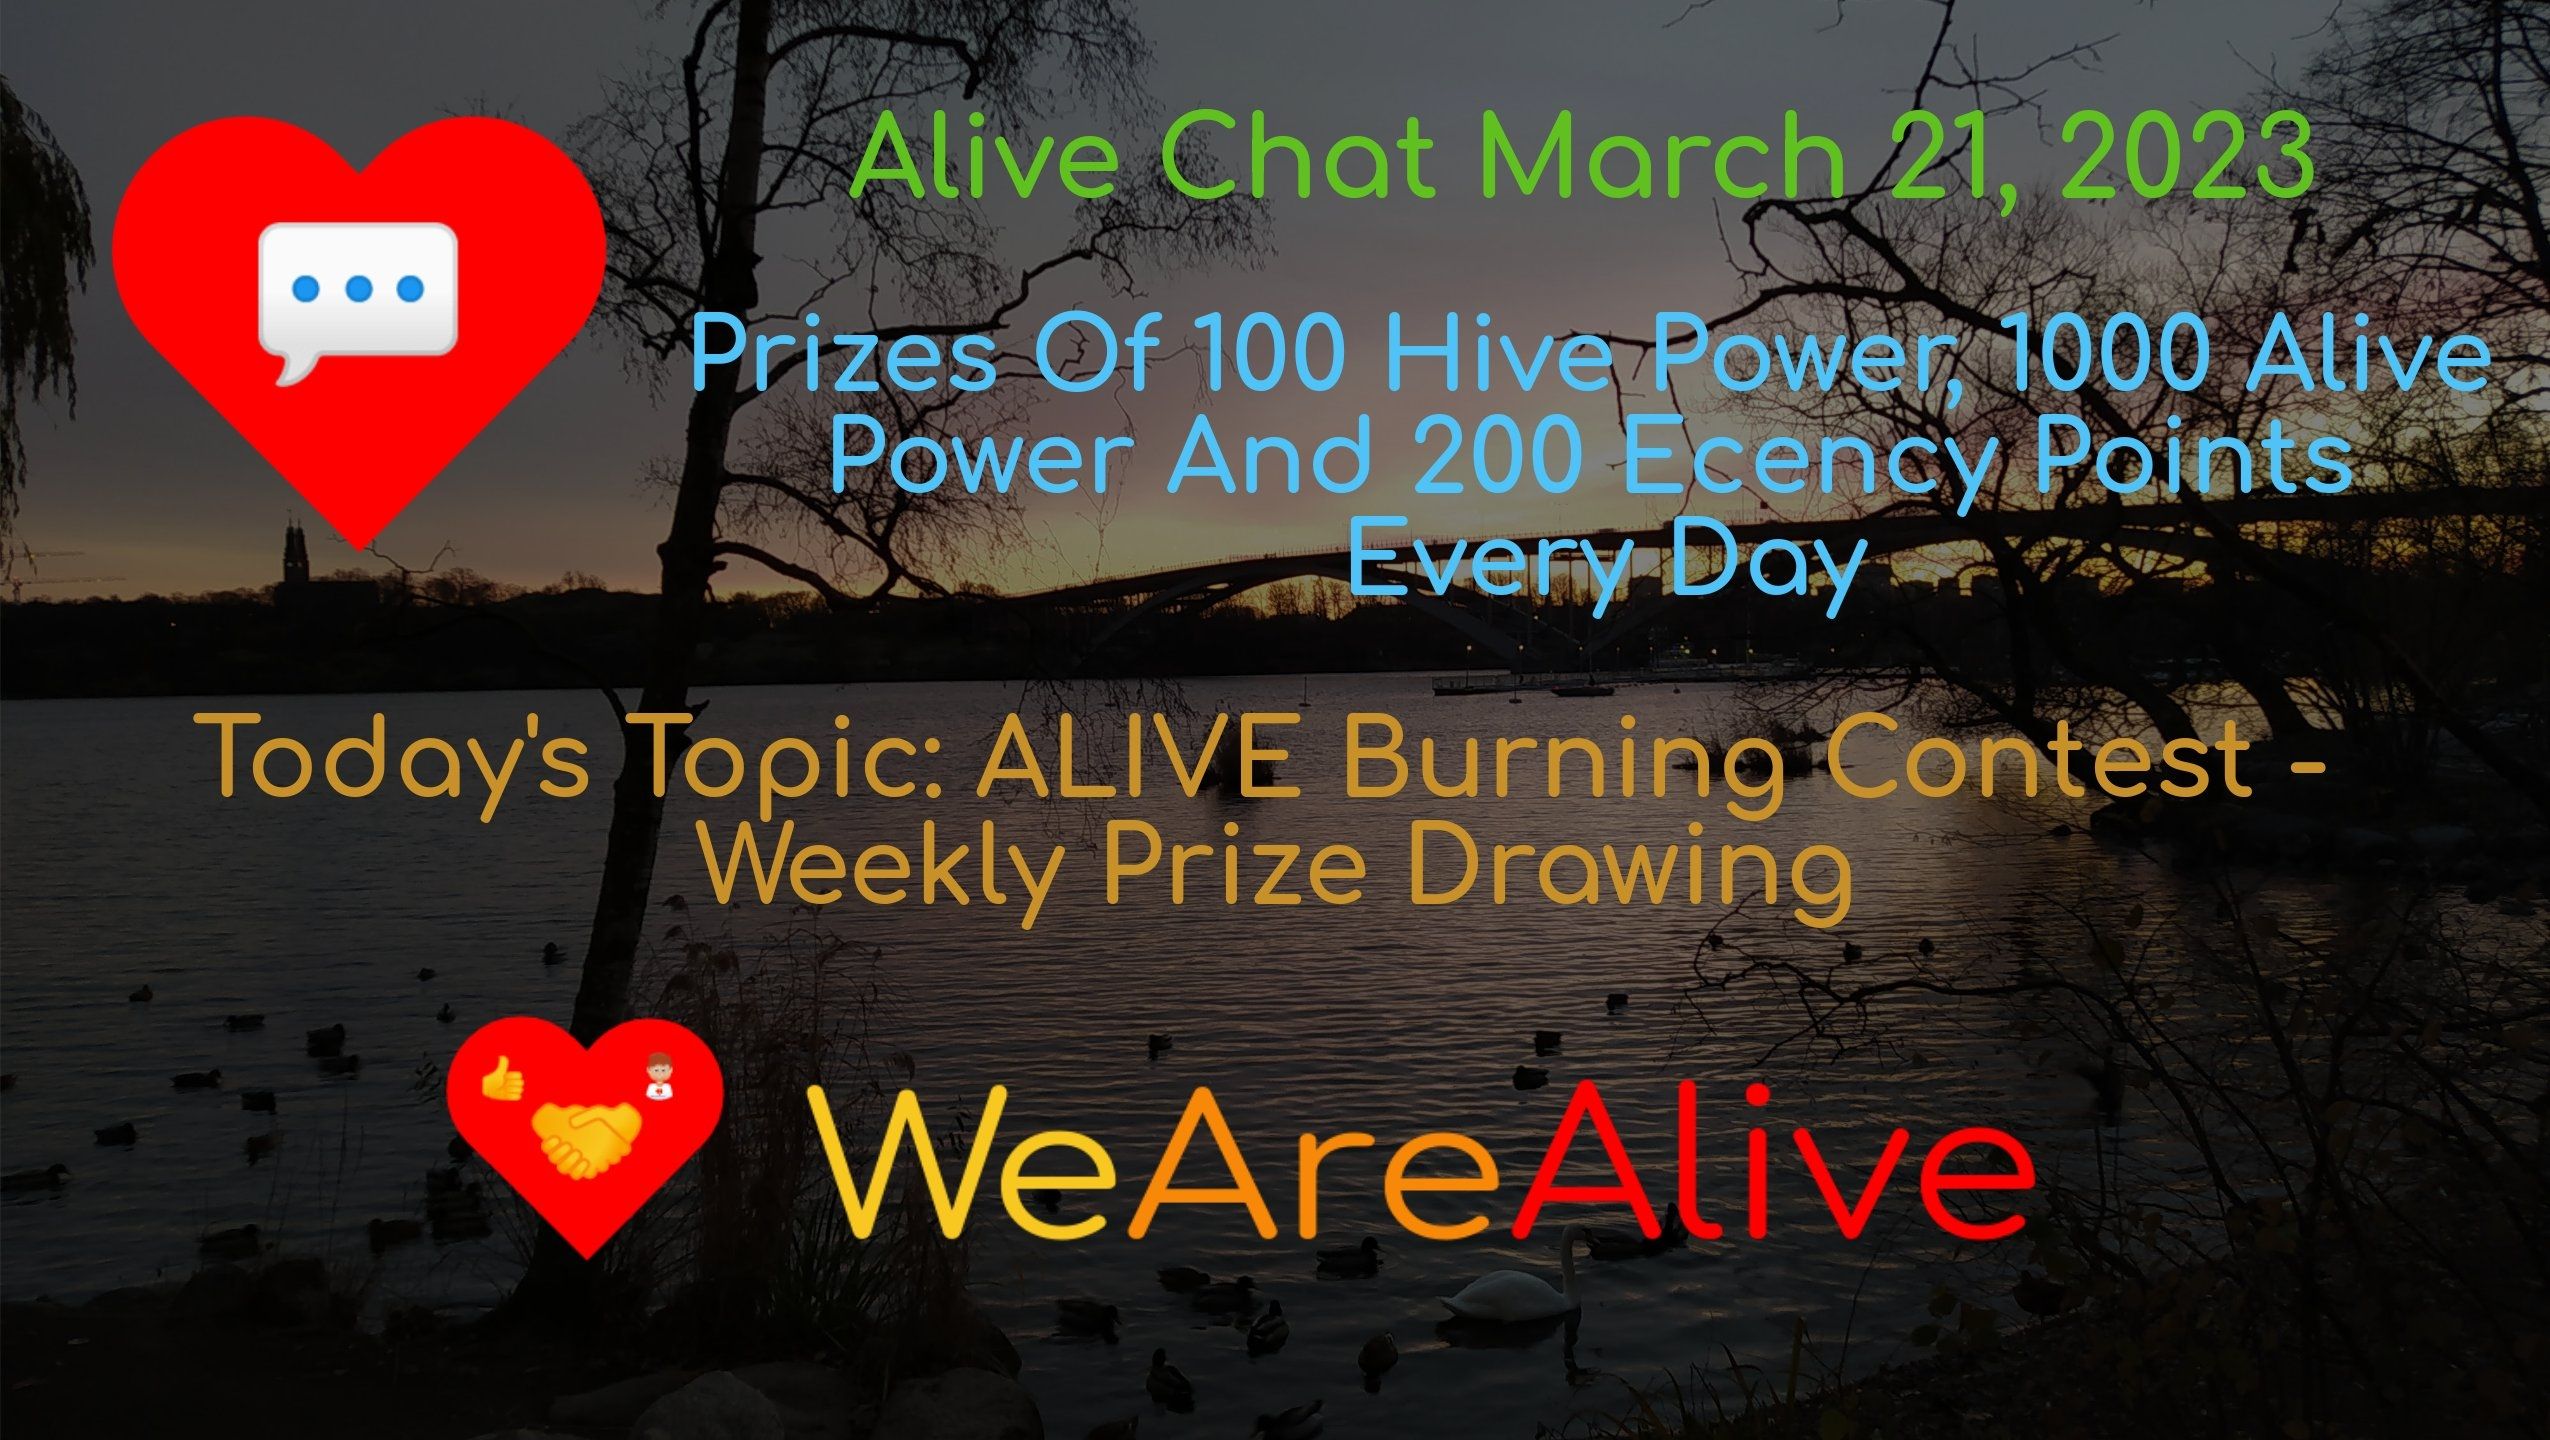 @alive.chat/alive-chat-march-20-2023-25a91b37d1241